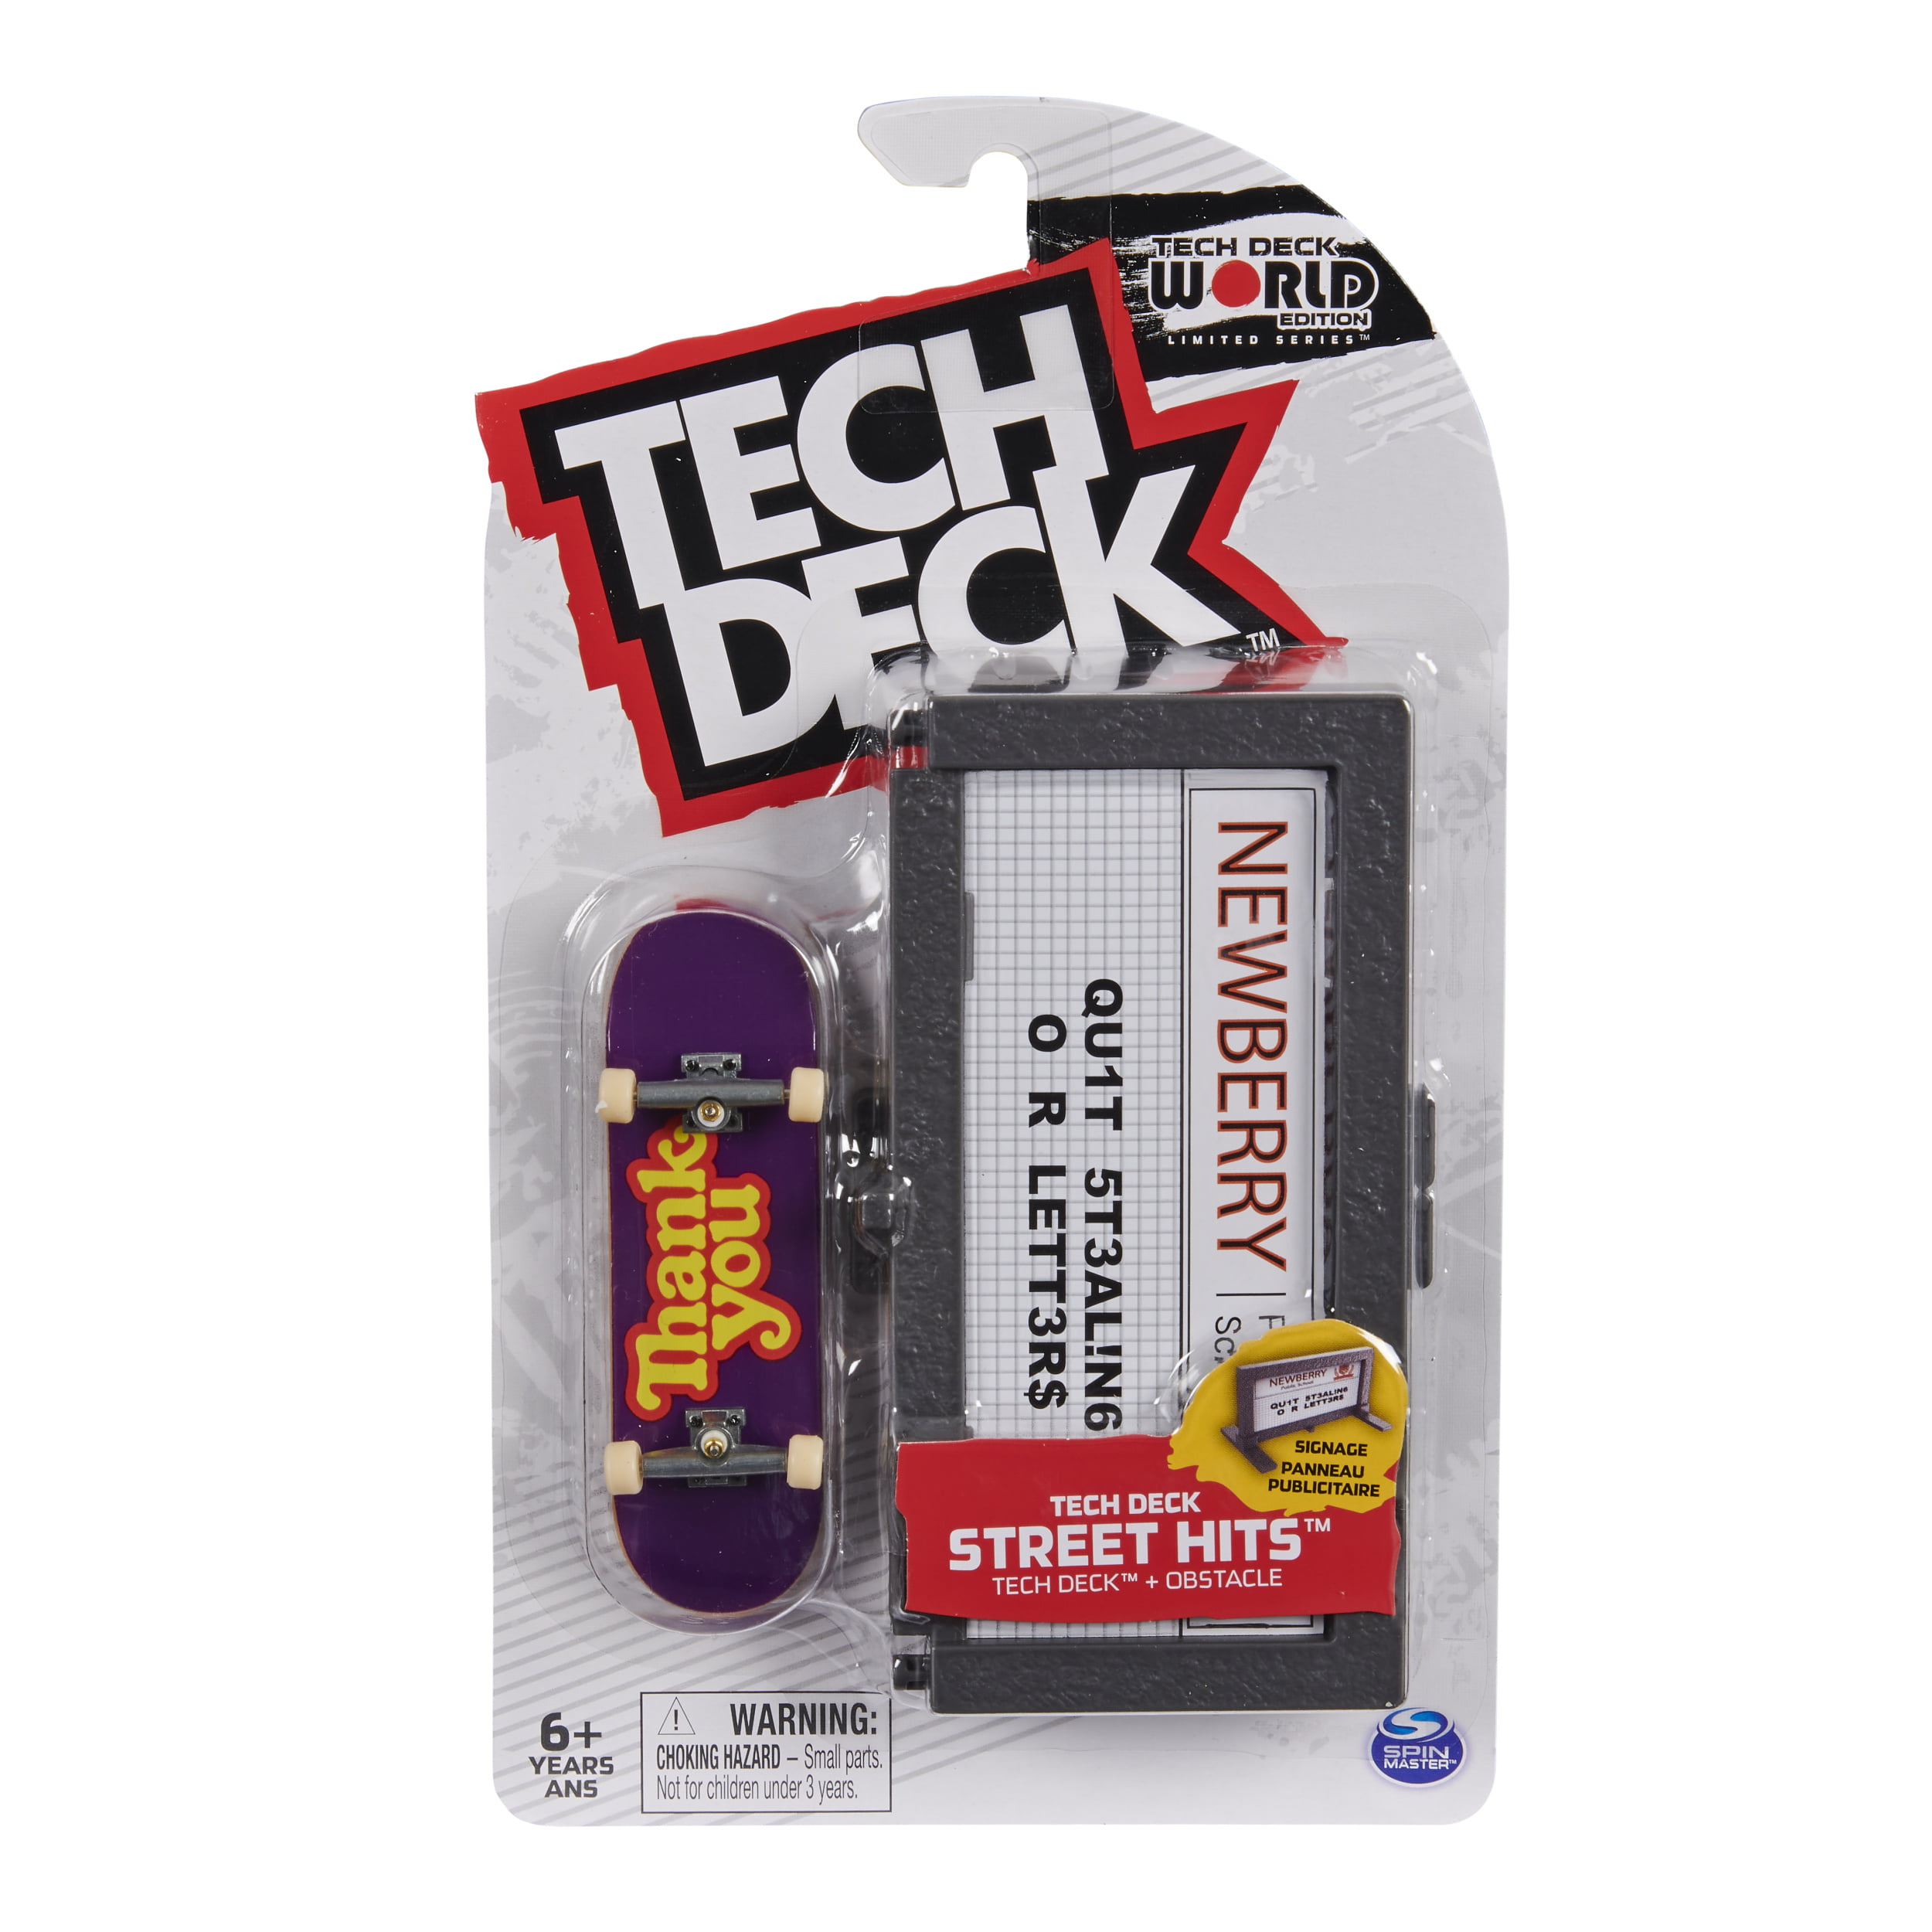 That's MY Tech Deck, Right?” 👀 